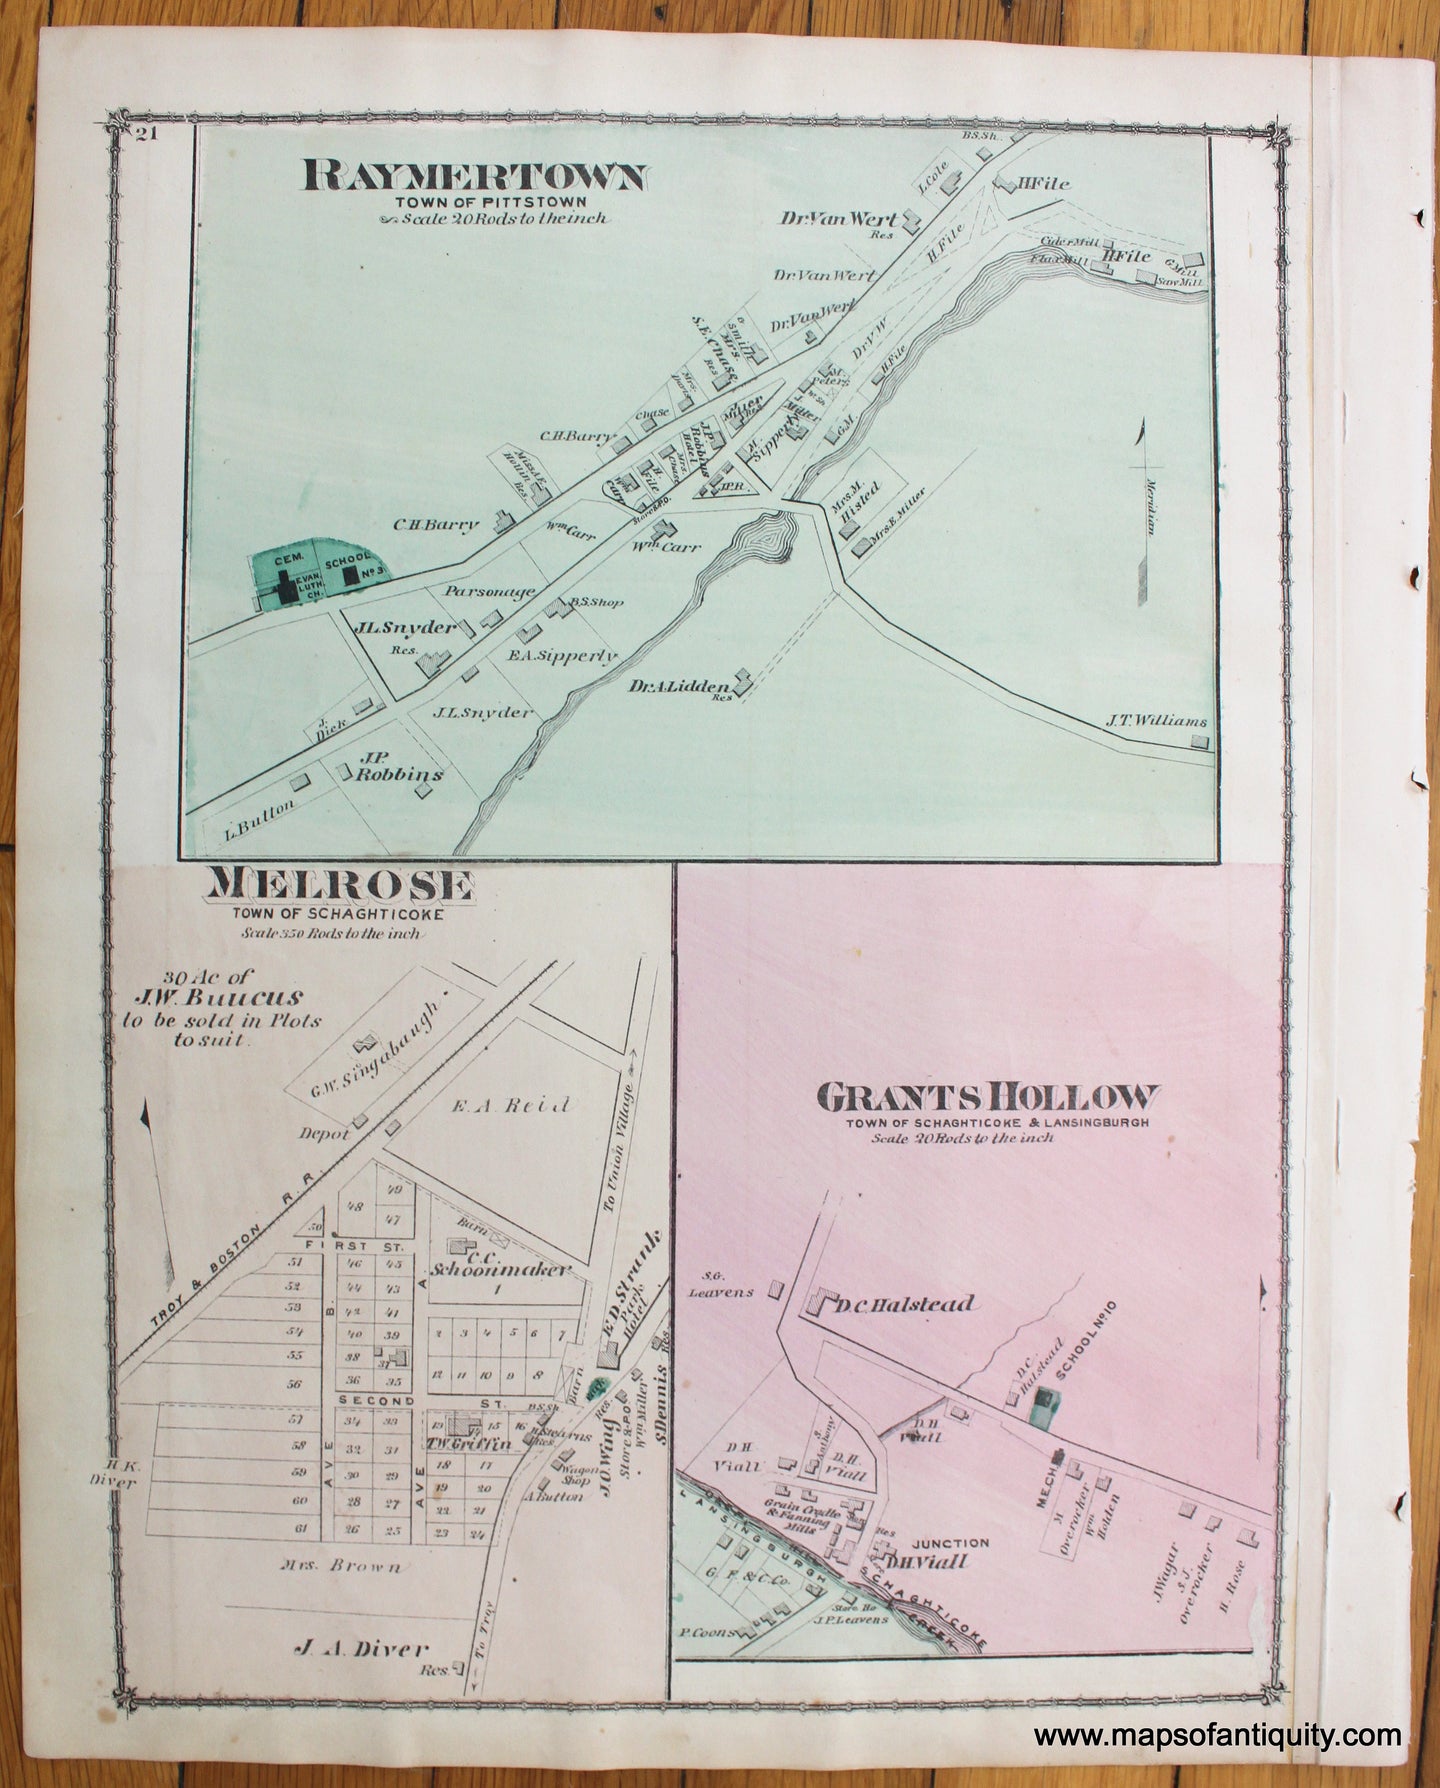 Antique-Hand-Colored-Map-Raymertown-Pittstown;-Melrose-Schaghticoke;-Grants-Hollow-Schaghticoke-and-Lansingburgh;-Verso:-Schaghticoke-Hill-Schaghticoke-and-Boyntonville-Pittstown-NY-1876-Beers-1800s-19th-century-Maps-of-Antiquity